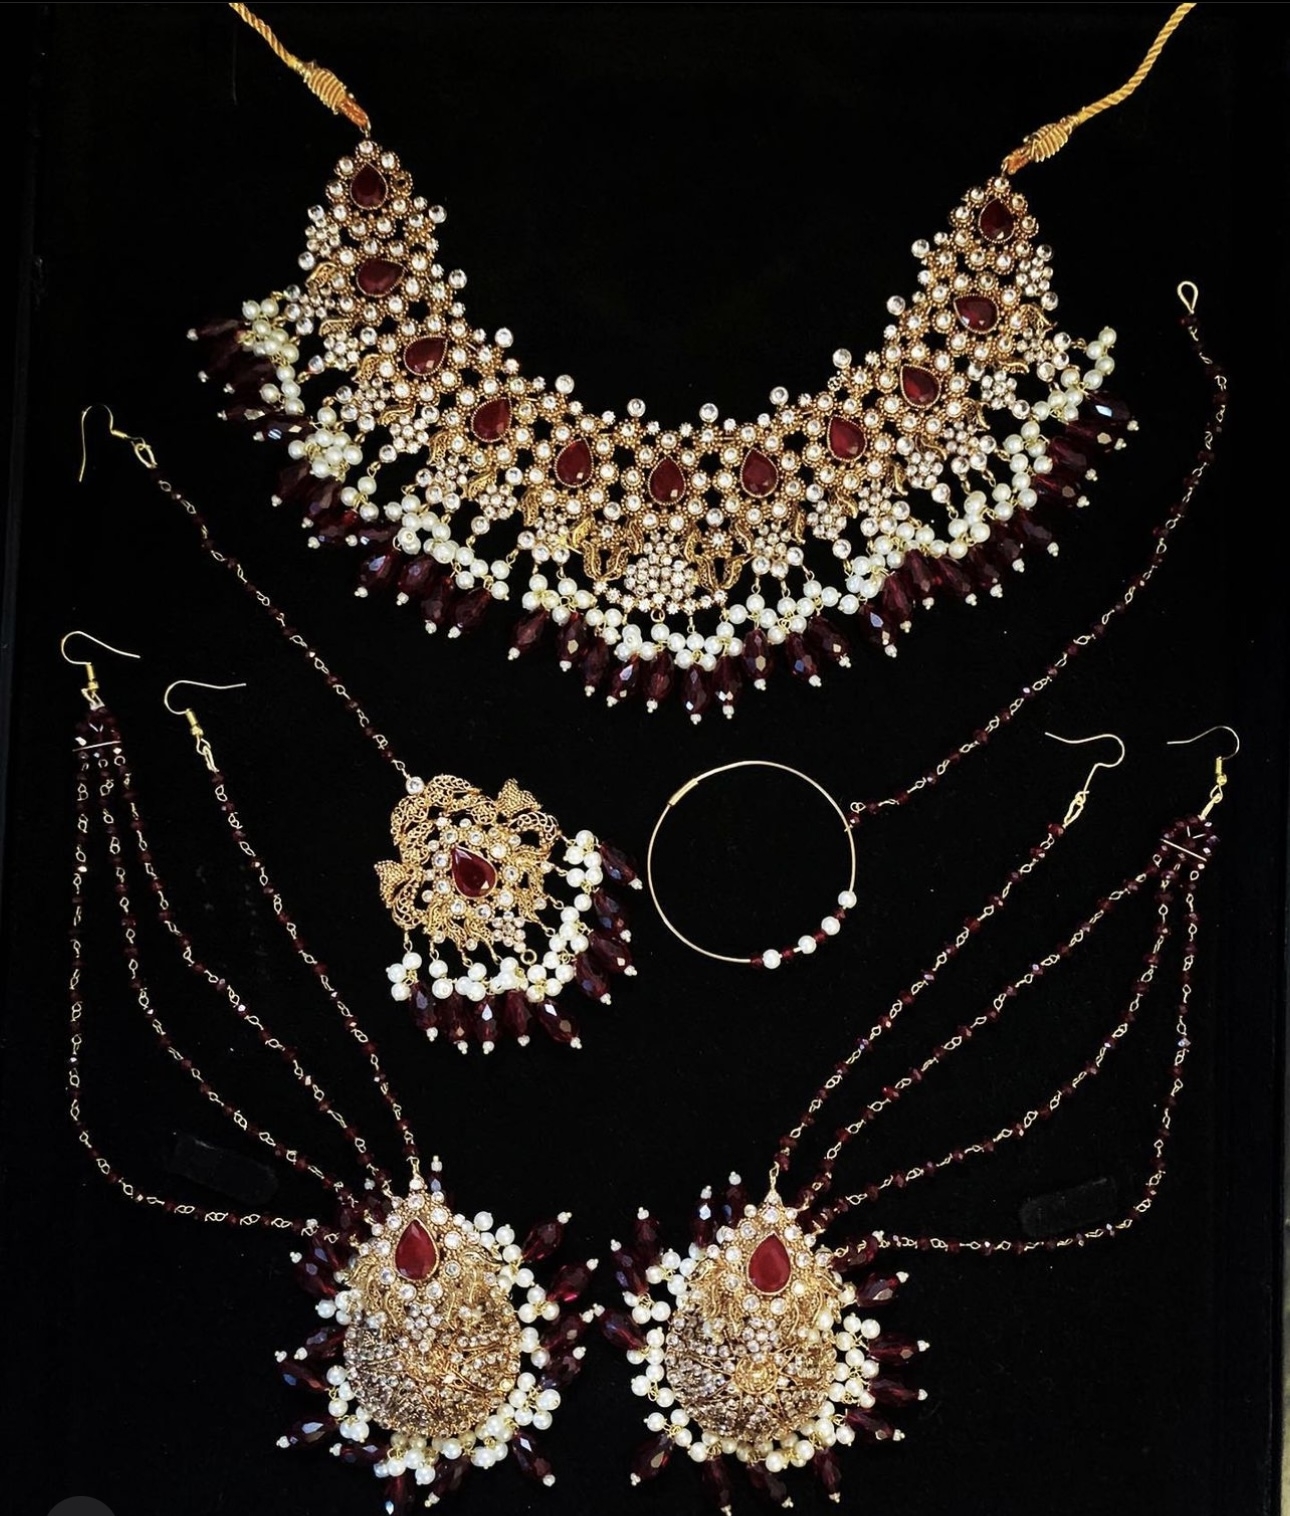 Gold and deep red bridal jewellery with white pearls